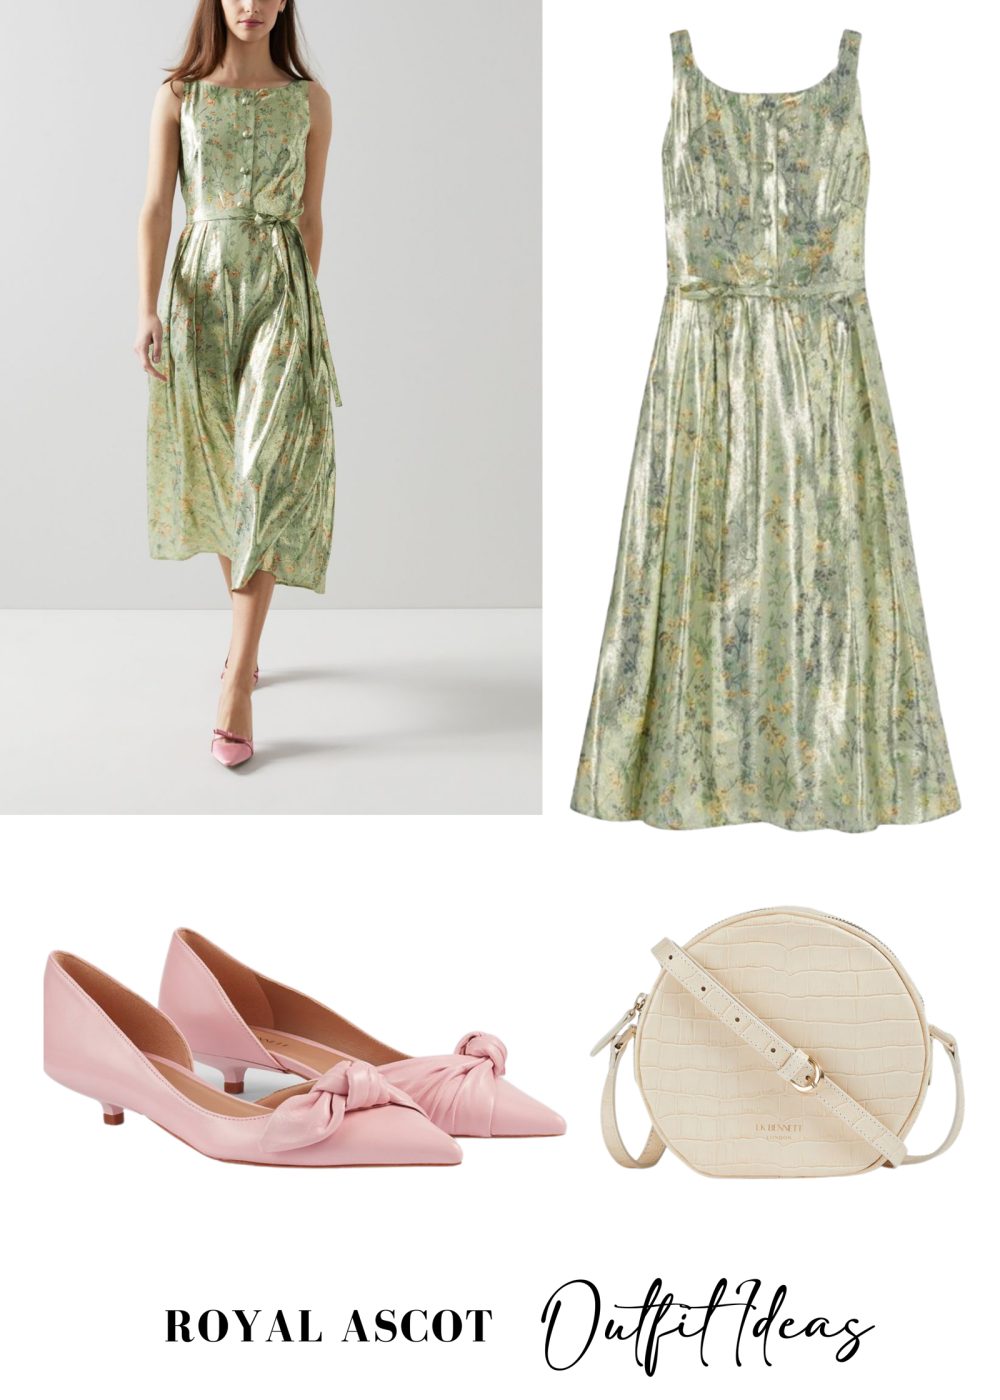 Royal Ascot Outfit Ideas